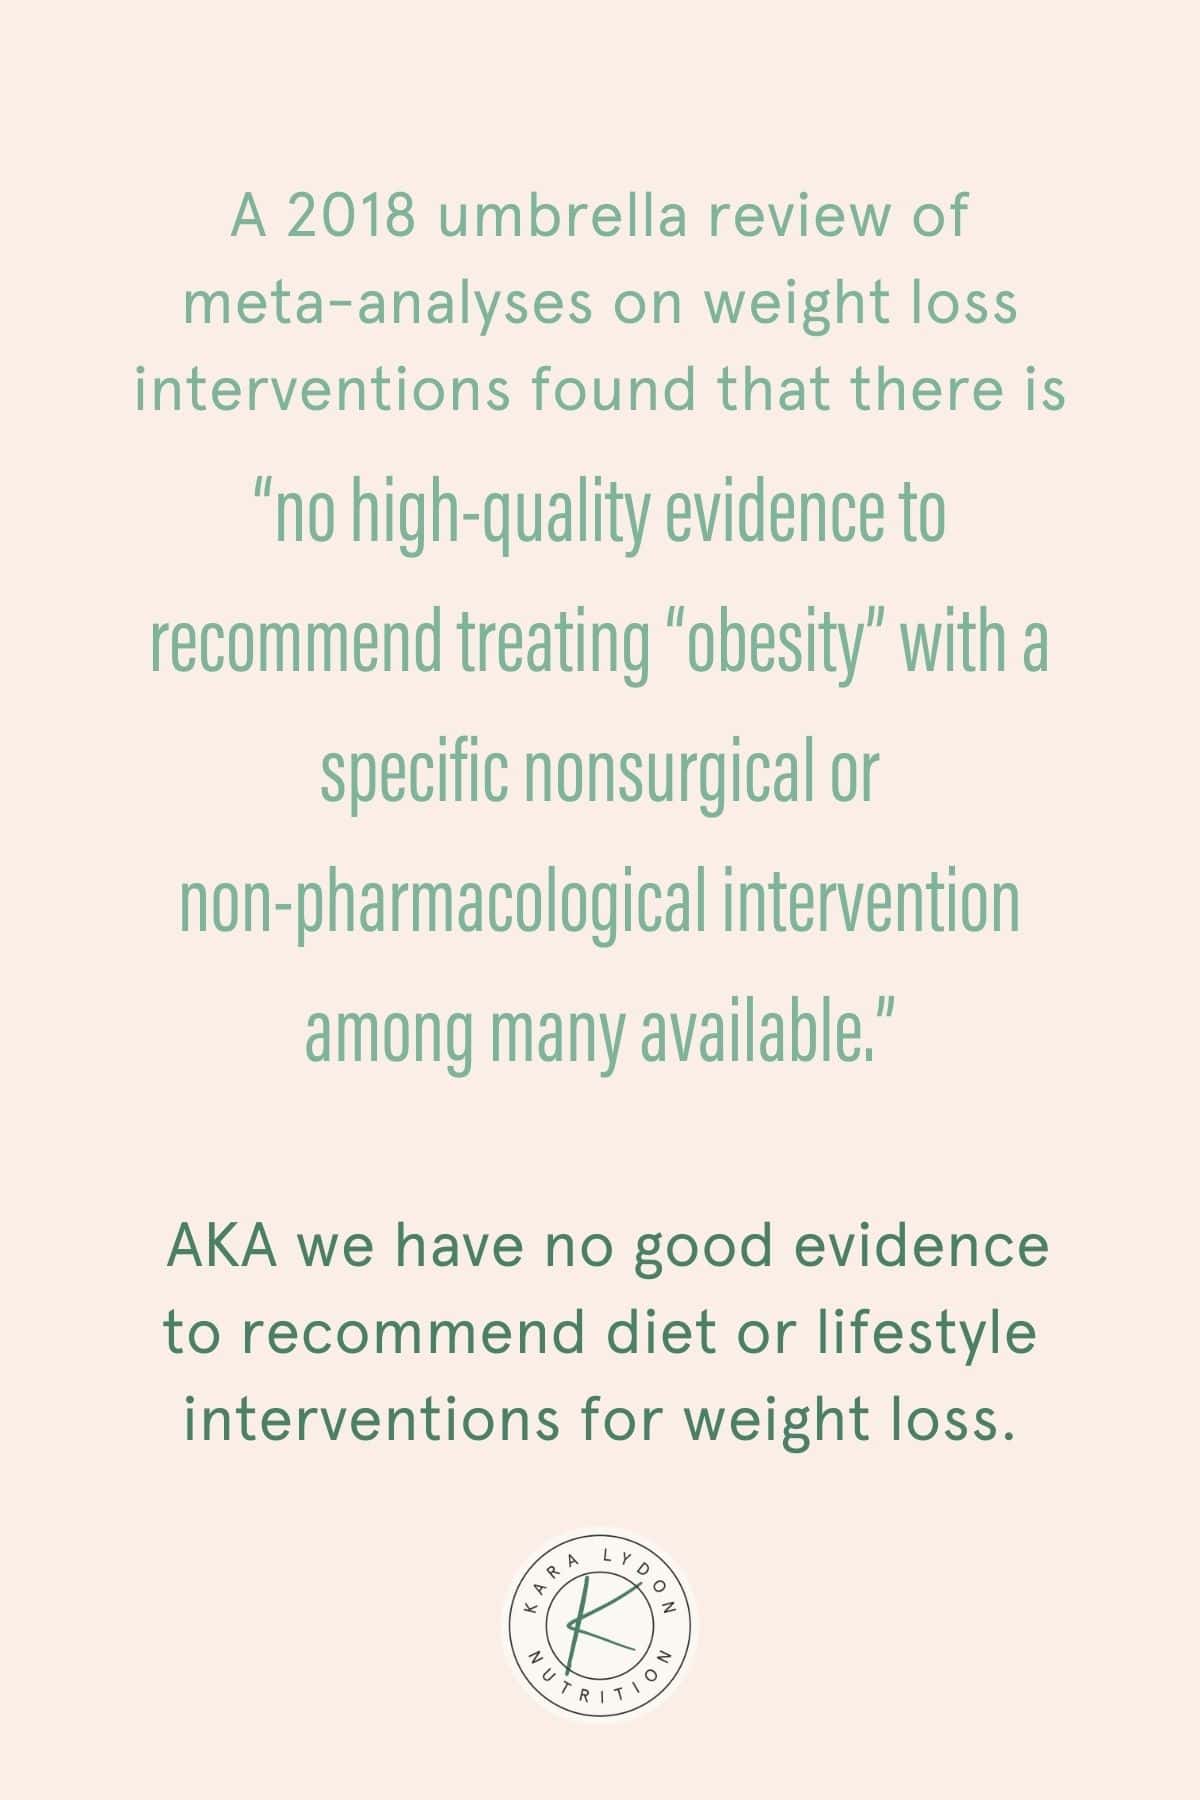 Graphic with quote: "A 2018 umbrella review of meta-analyses on weight loss interventions found that there is "no high-quality evidence to recommend treating "obesity" with a specific nonsurgical or non-pharmacological intervention among many available." AKA we have no good evidence to recommend diet or lifestyle interventions for weight loss."